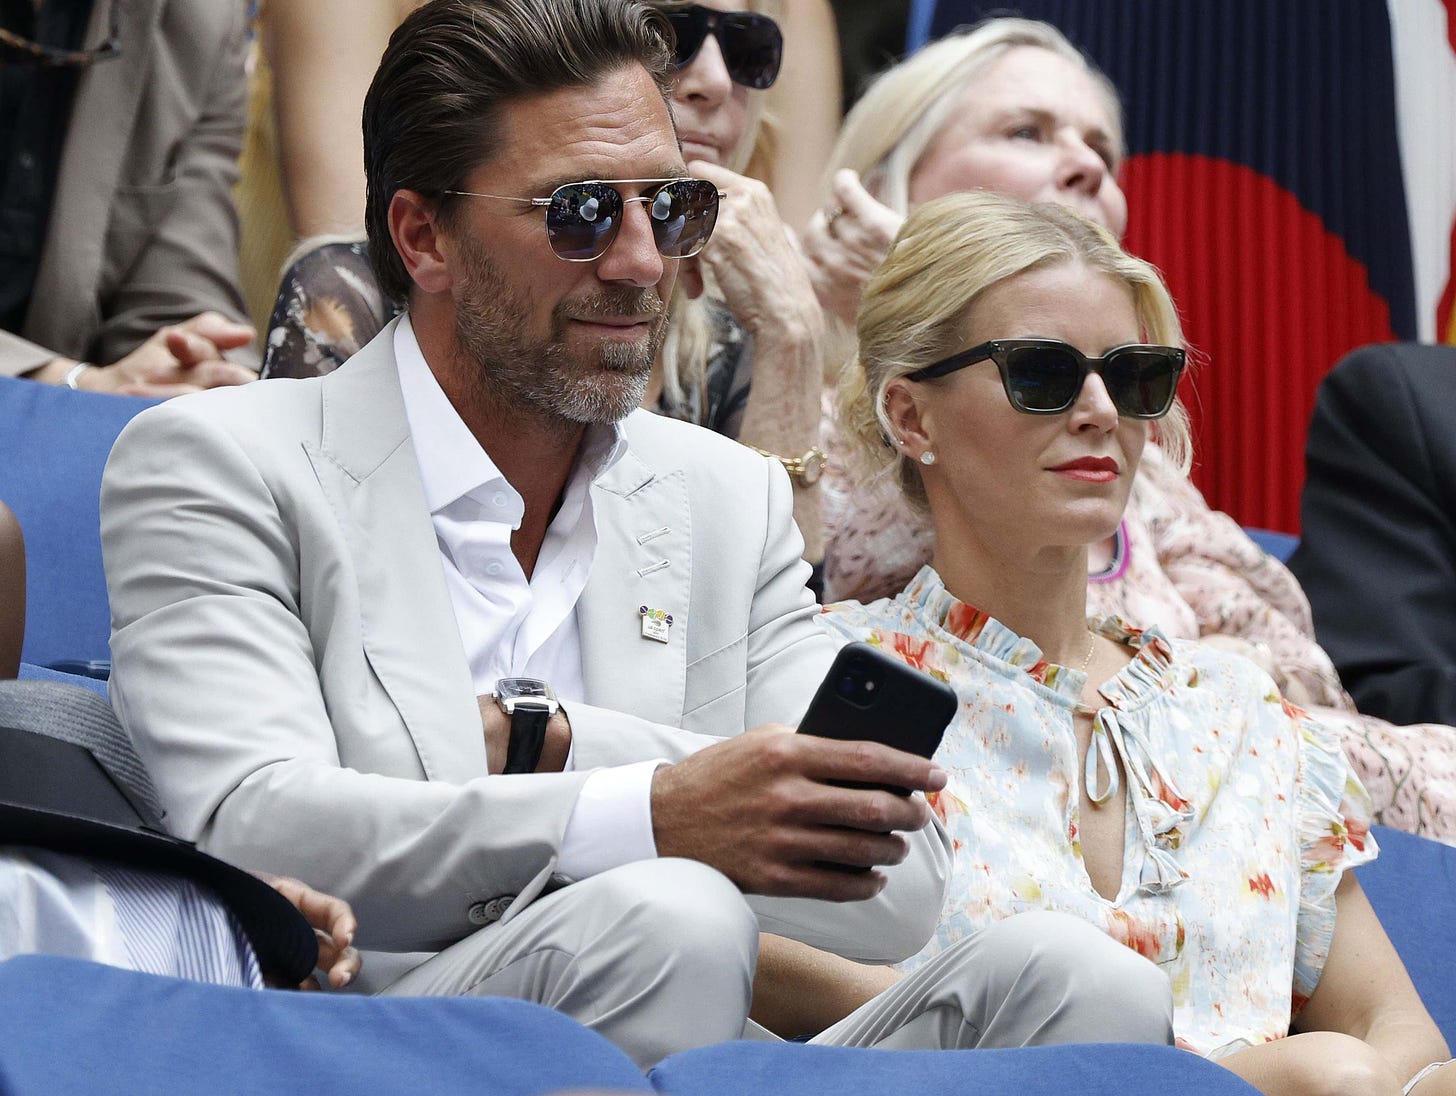 Brad Pitt Paled In Comparison To The God Henrik Lundqvist At The US Open  Final | Barstool Sports